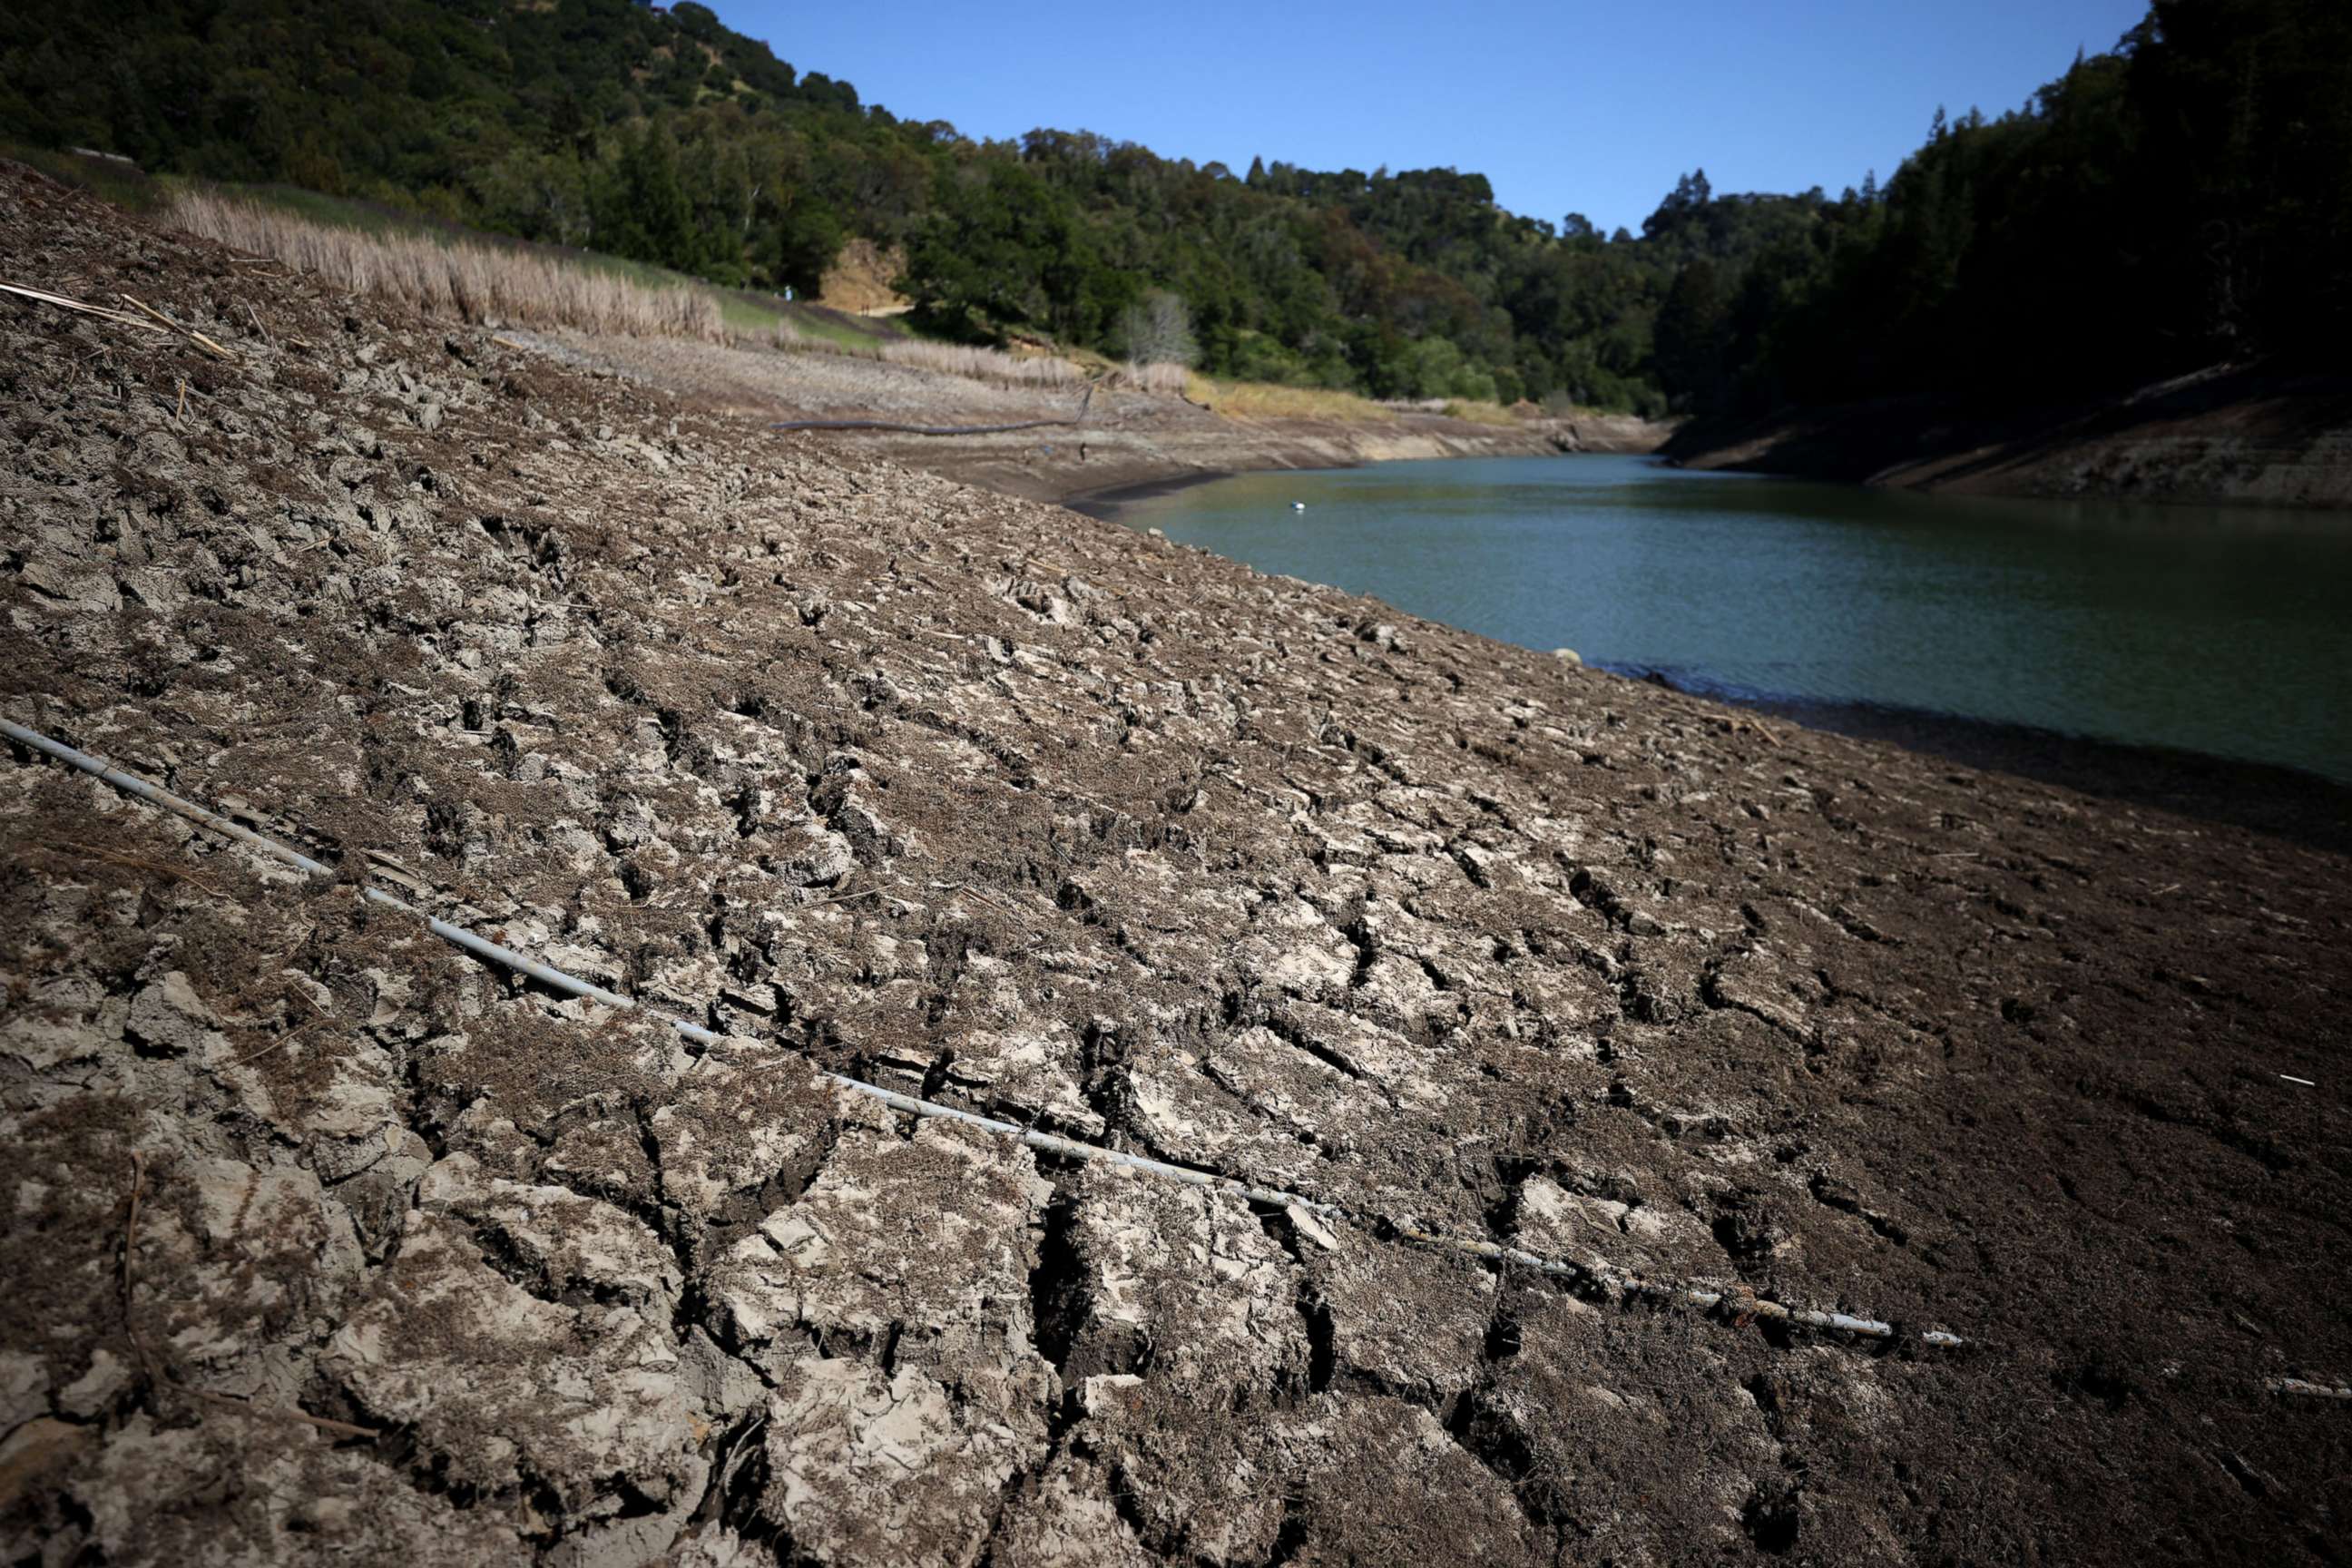 PHOTO: Dry cracked earth is visible along the banks of Phoenix Lake on April 21, 2021, in Ross, Calif.